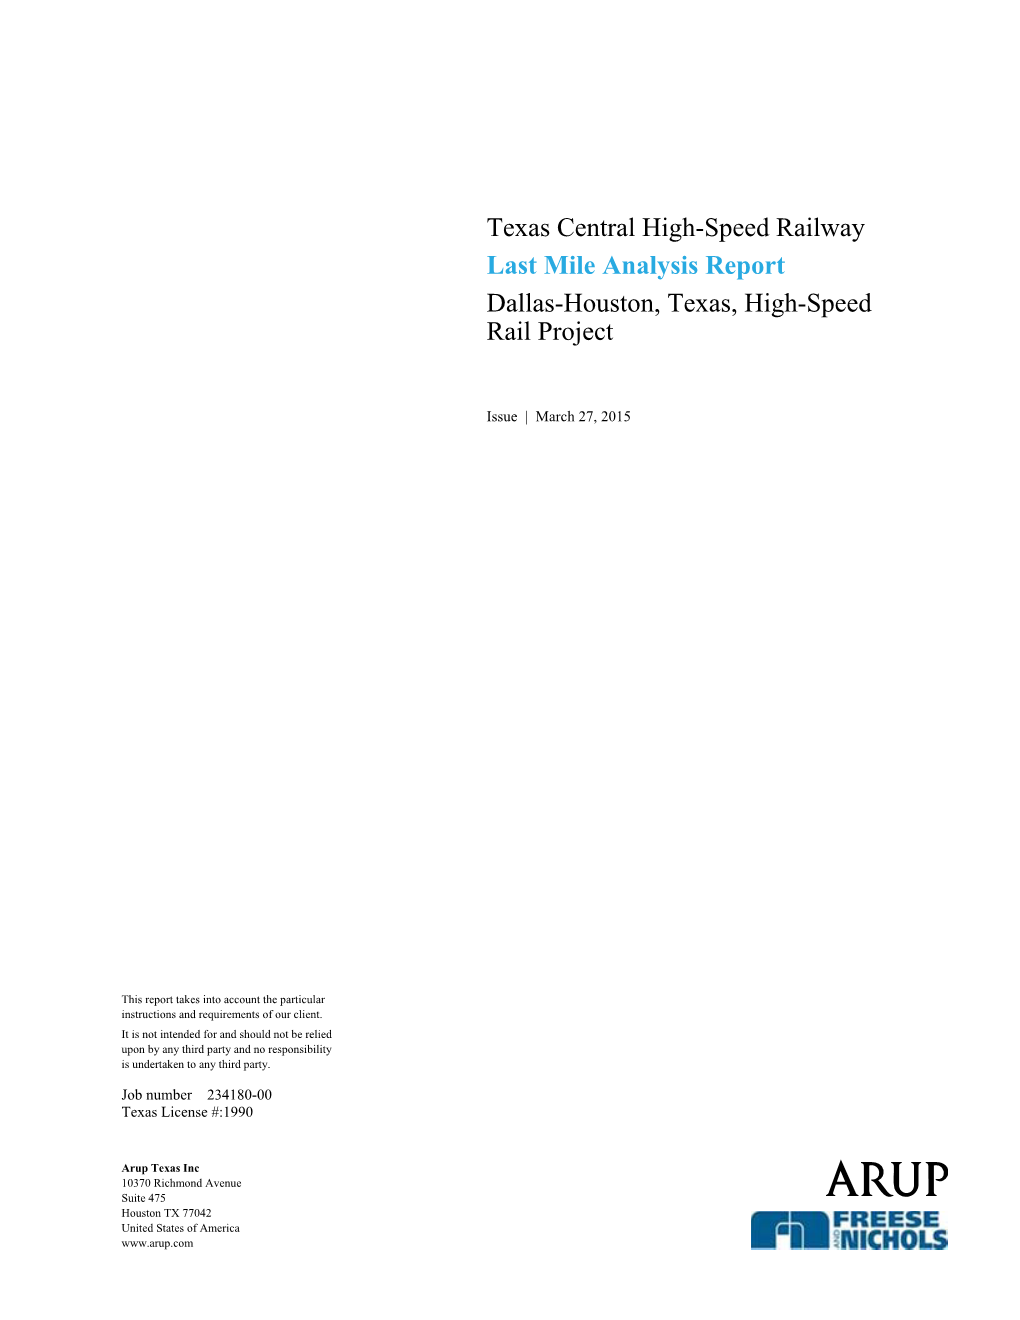 Texas Central High-Speed Railway Last Mile Analysis Report Dallas-Houston, Texas, High-Speed Rail Project